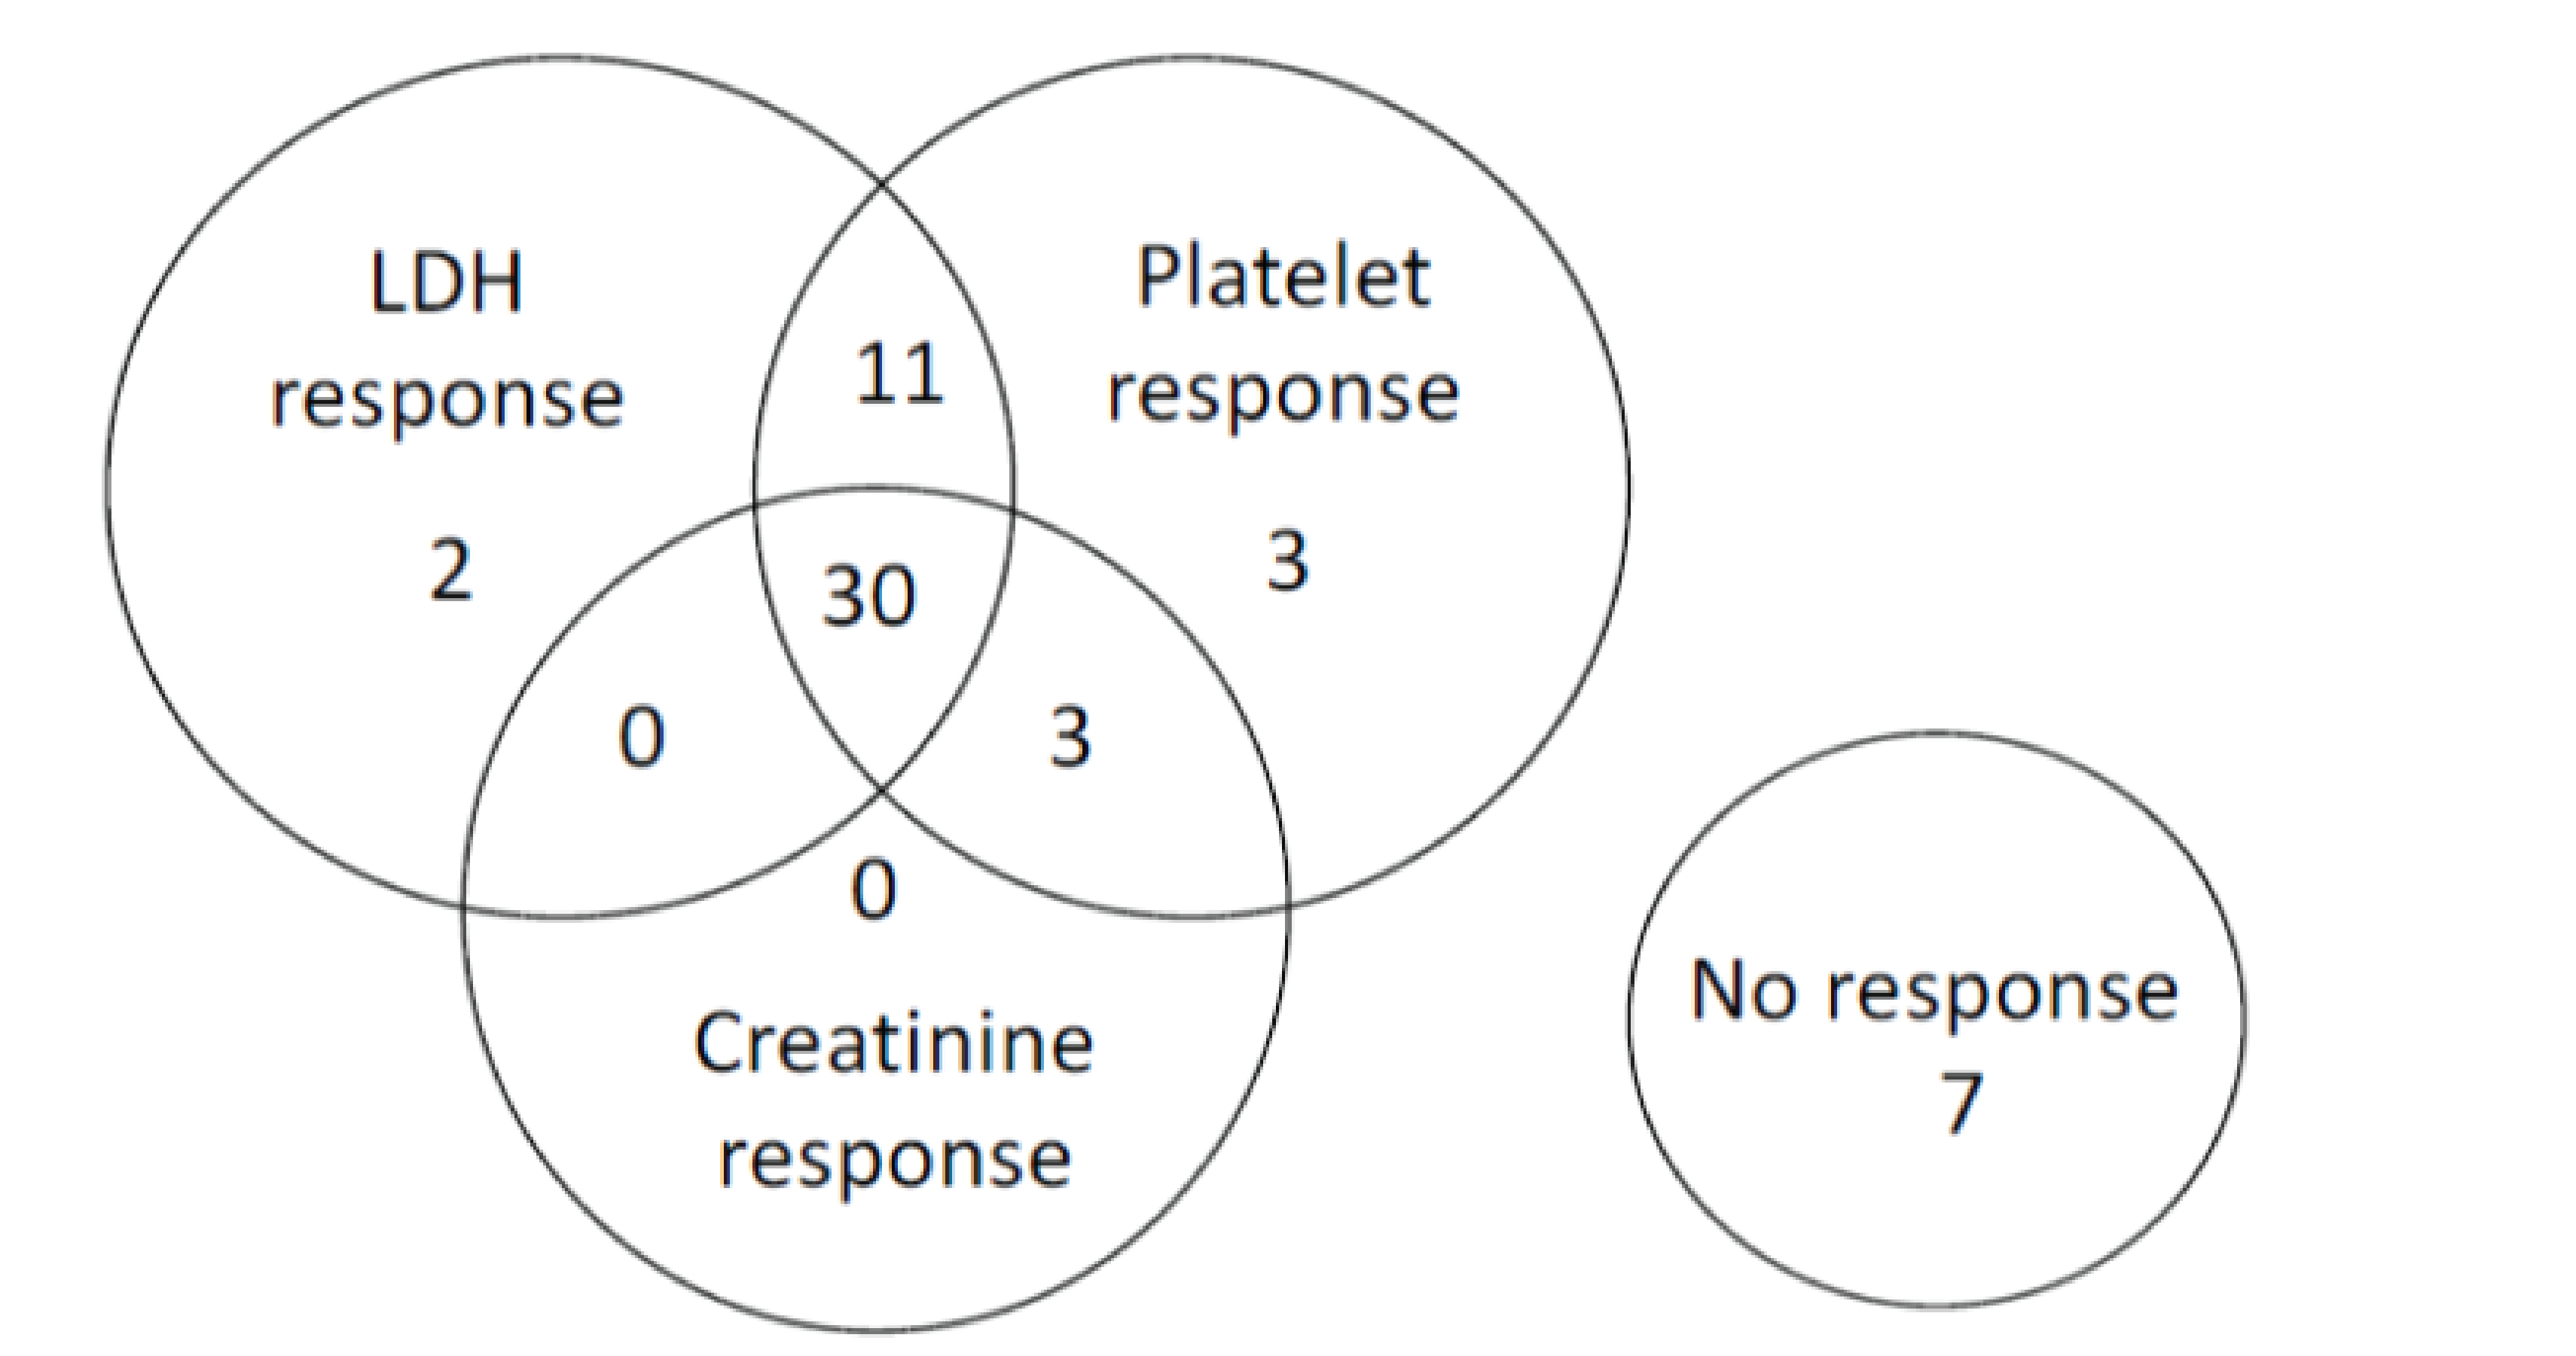 This figure shows that 30 patients achieved complete TMA response; 11 patients achieved normalization of platelet and LDH; 7 patients did not achieve any of the 3 components of the complete TMA response.